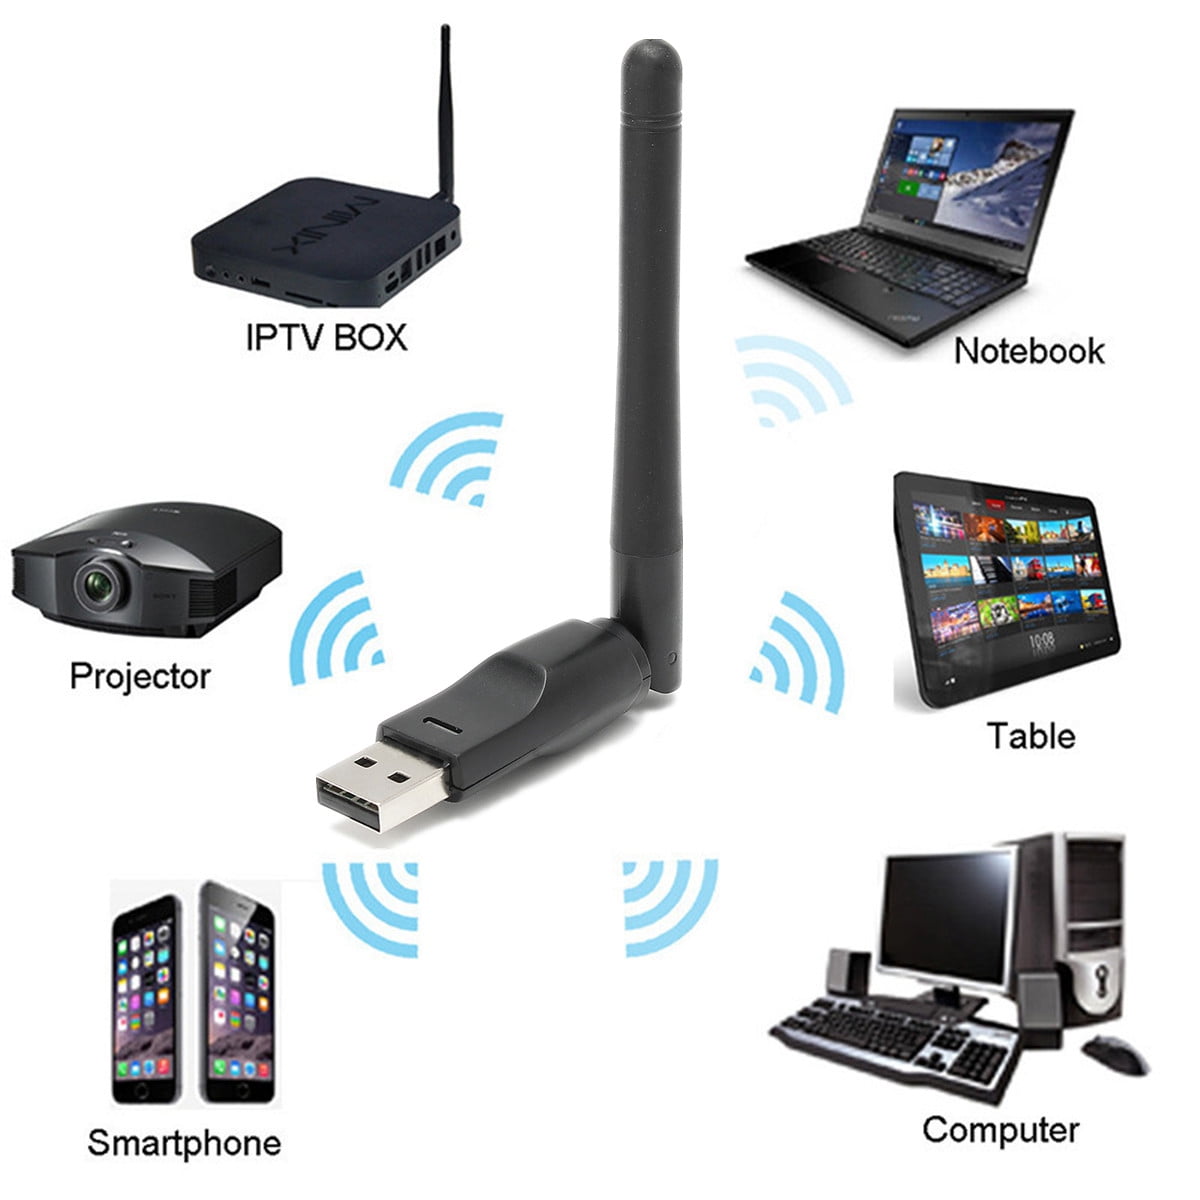 Wireless USB WiFi WLAN Network Adapter Antenna 150Mbps For MAG250 254 TV Box ！ 